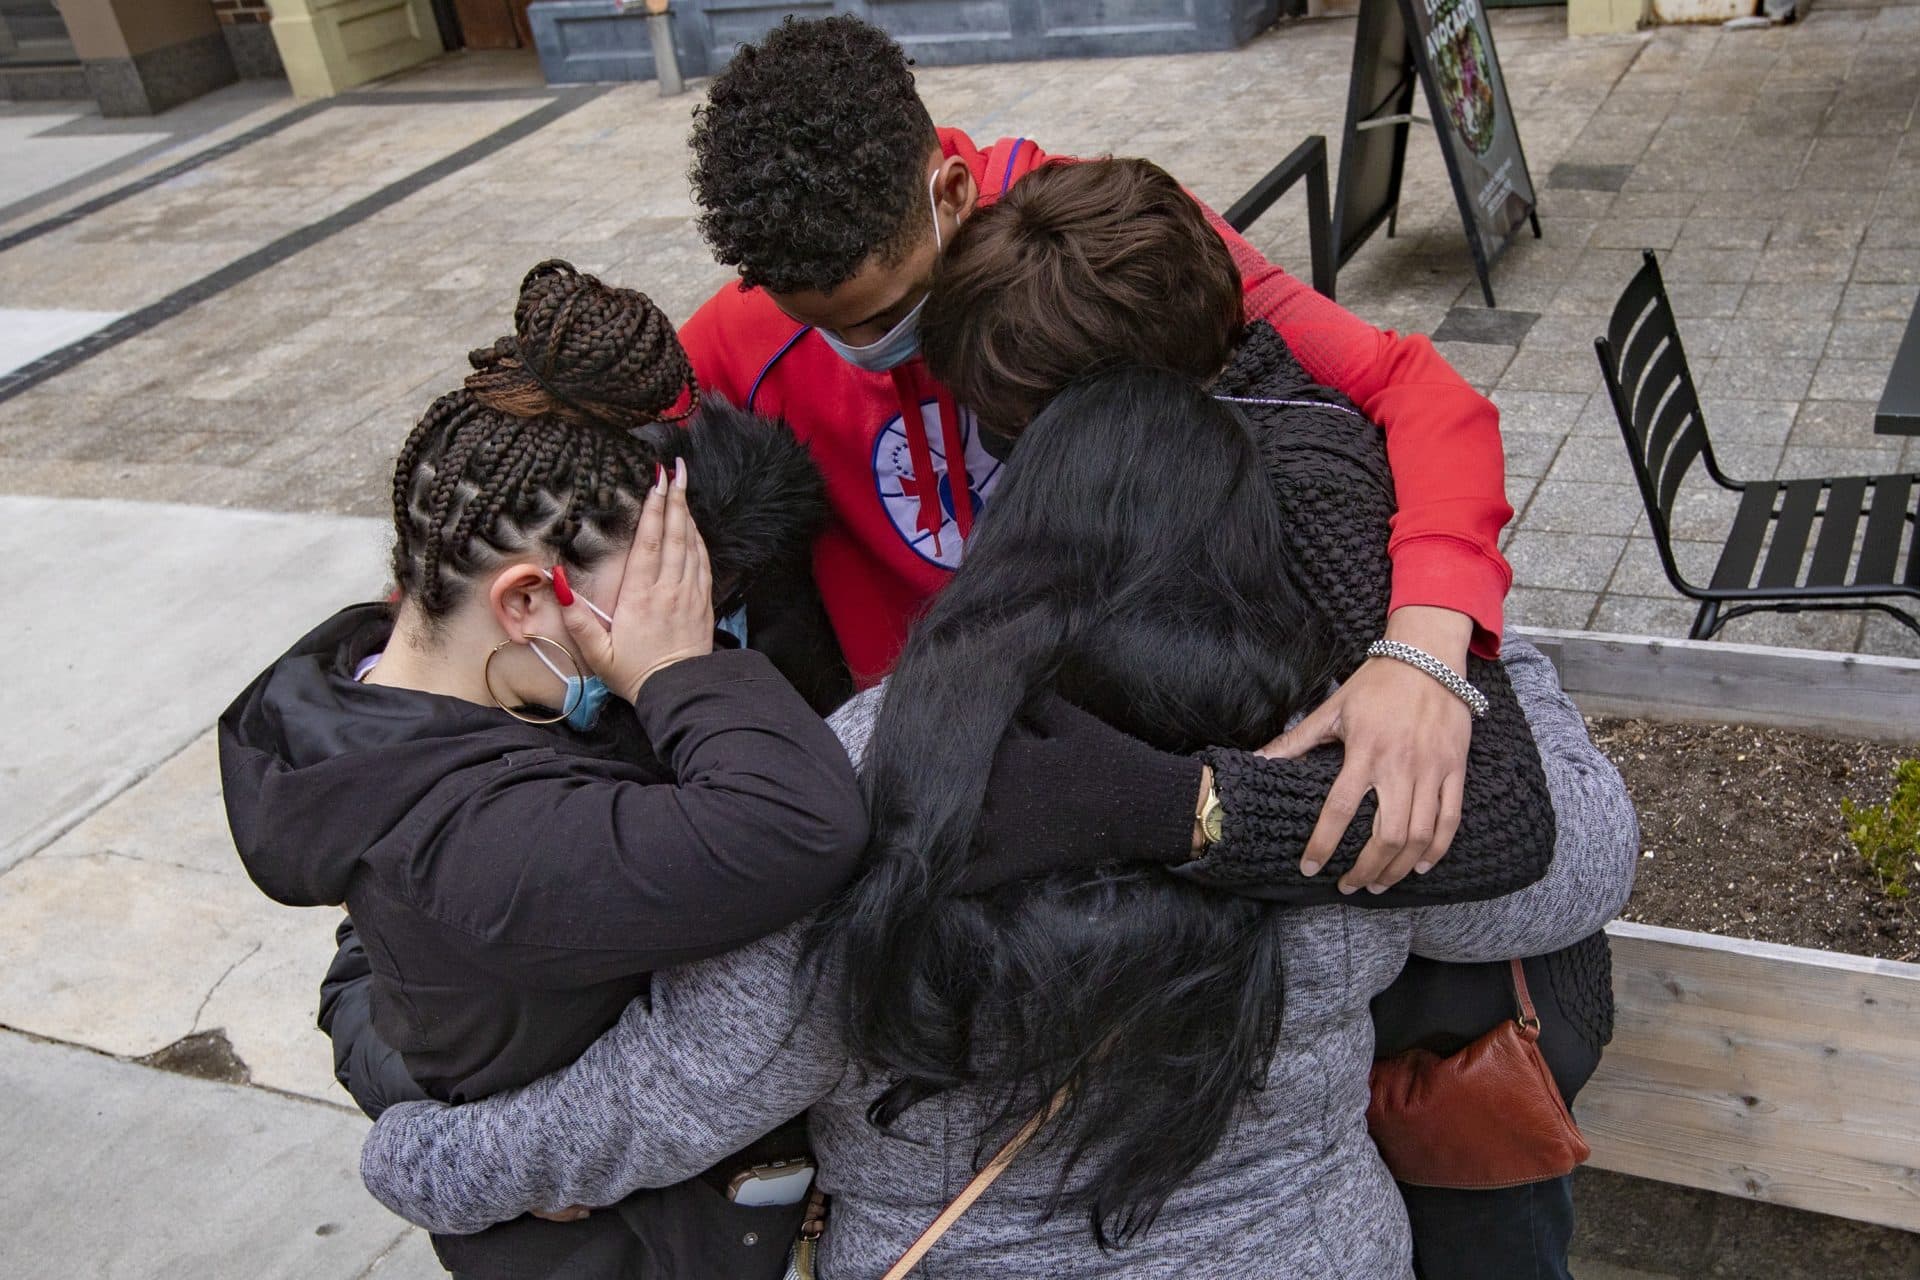 Boston Marathon bombing survivors Joselyn Perez, her mother Sara Valverde Perez and Laurie Scher, embrace with her brother Yoelin Perez and her aunt Susana Hunter during the moment of silence at the site of the finish line of the Boston Marathon on Boylston Street to mark the eighth anniversary of the bombing. (Jesse Costa/WBUR)